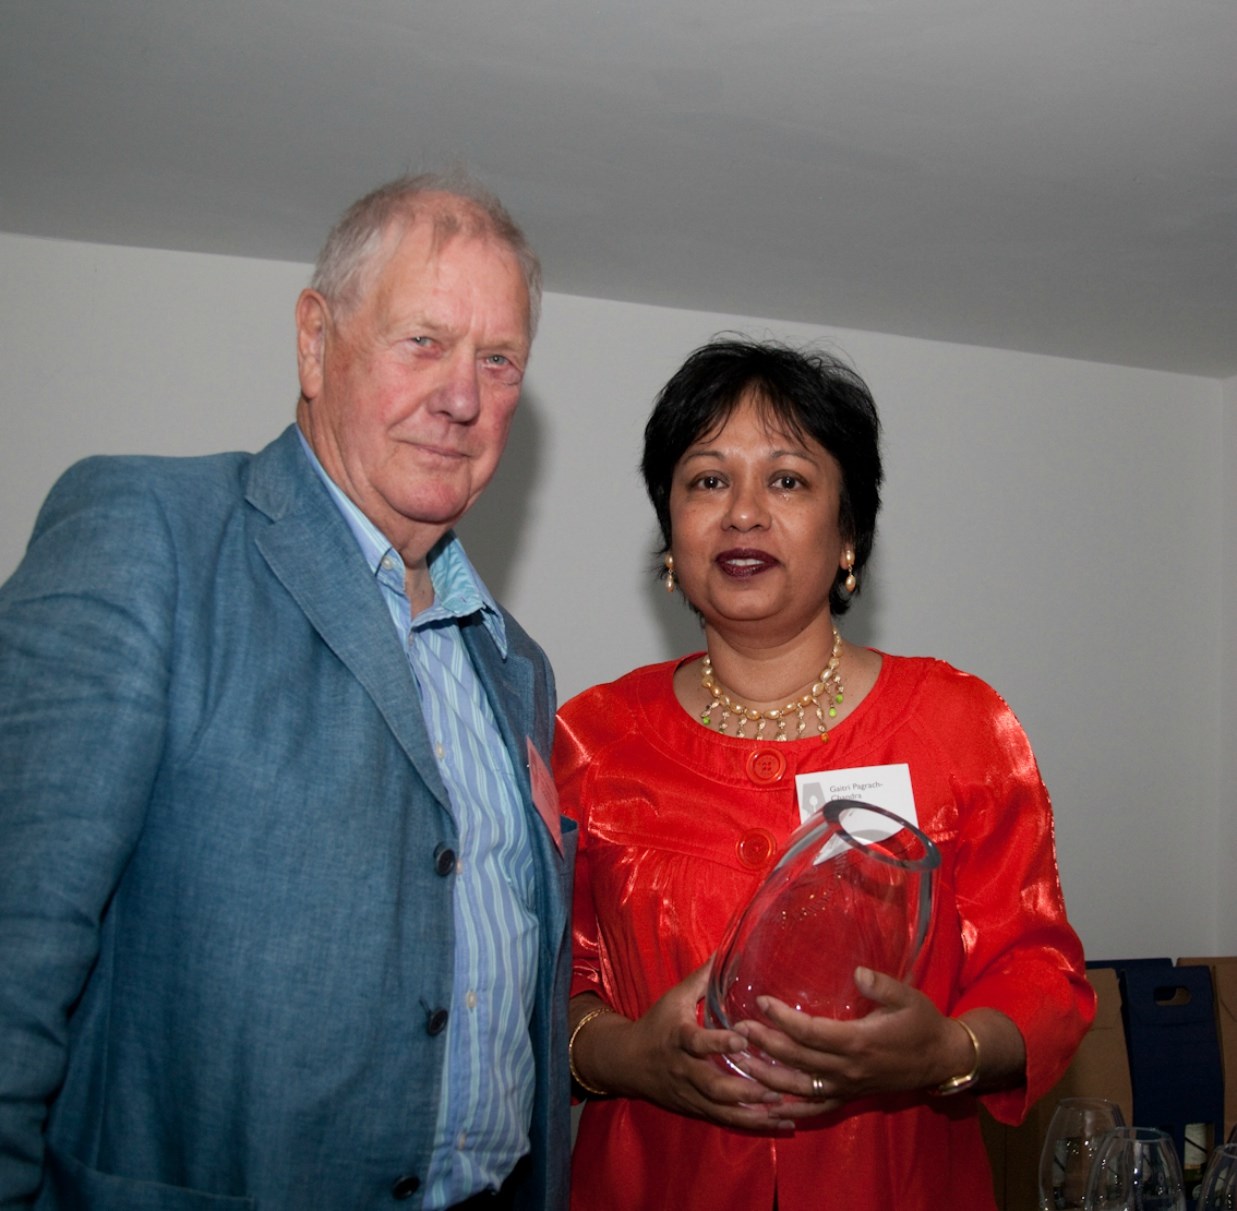 Colin Spencer (left) with Gaitri Pagrach-Chandra and her award